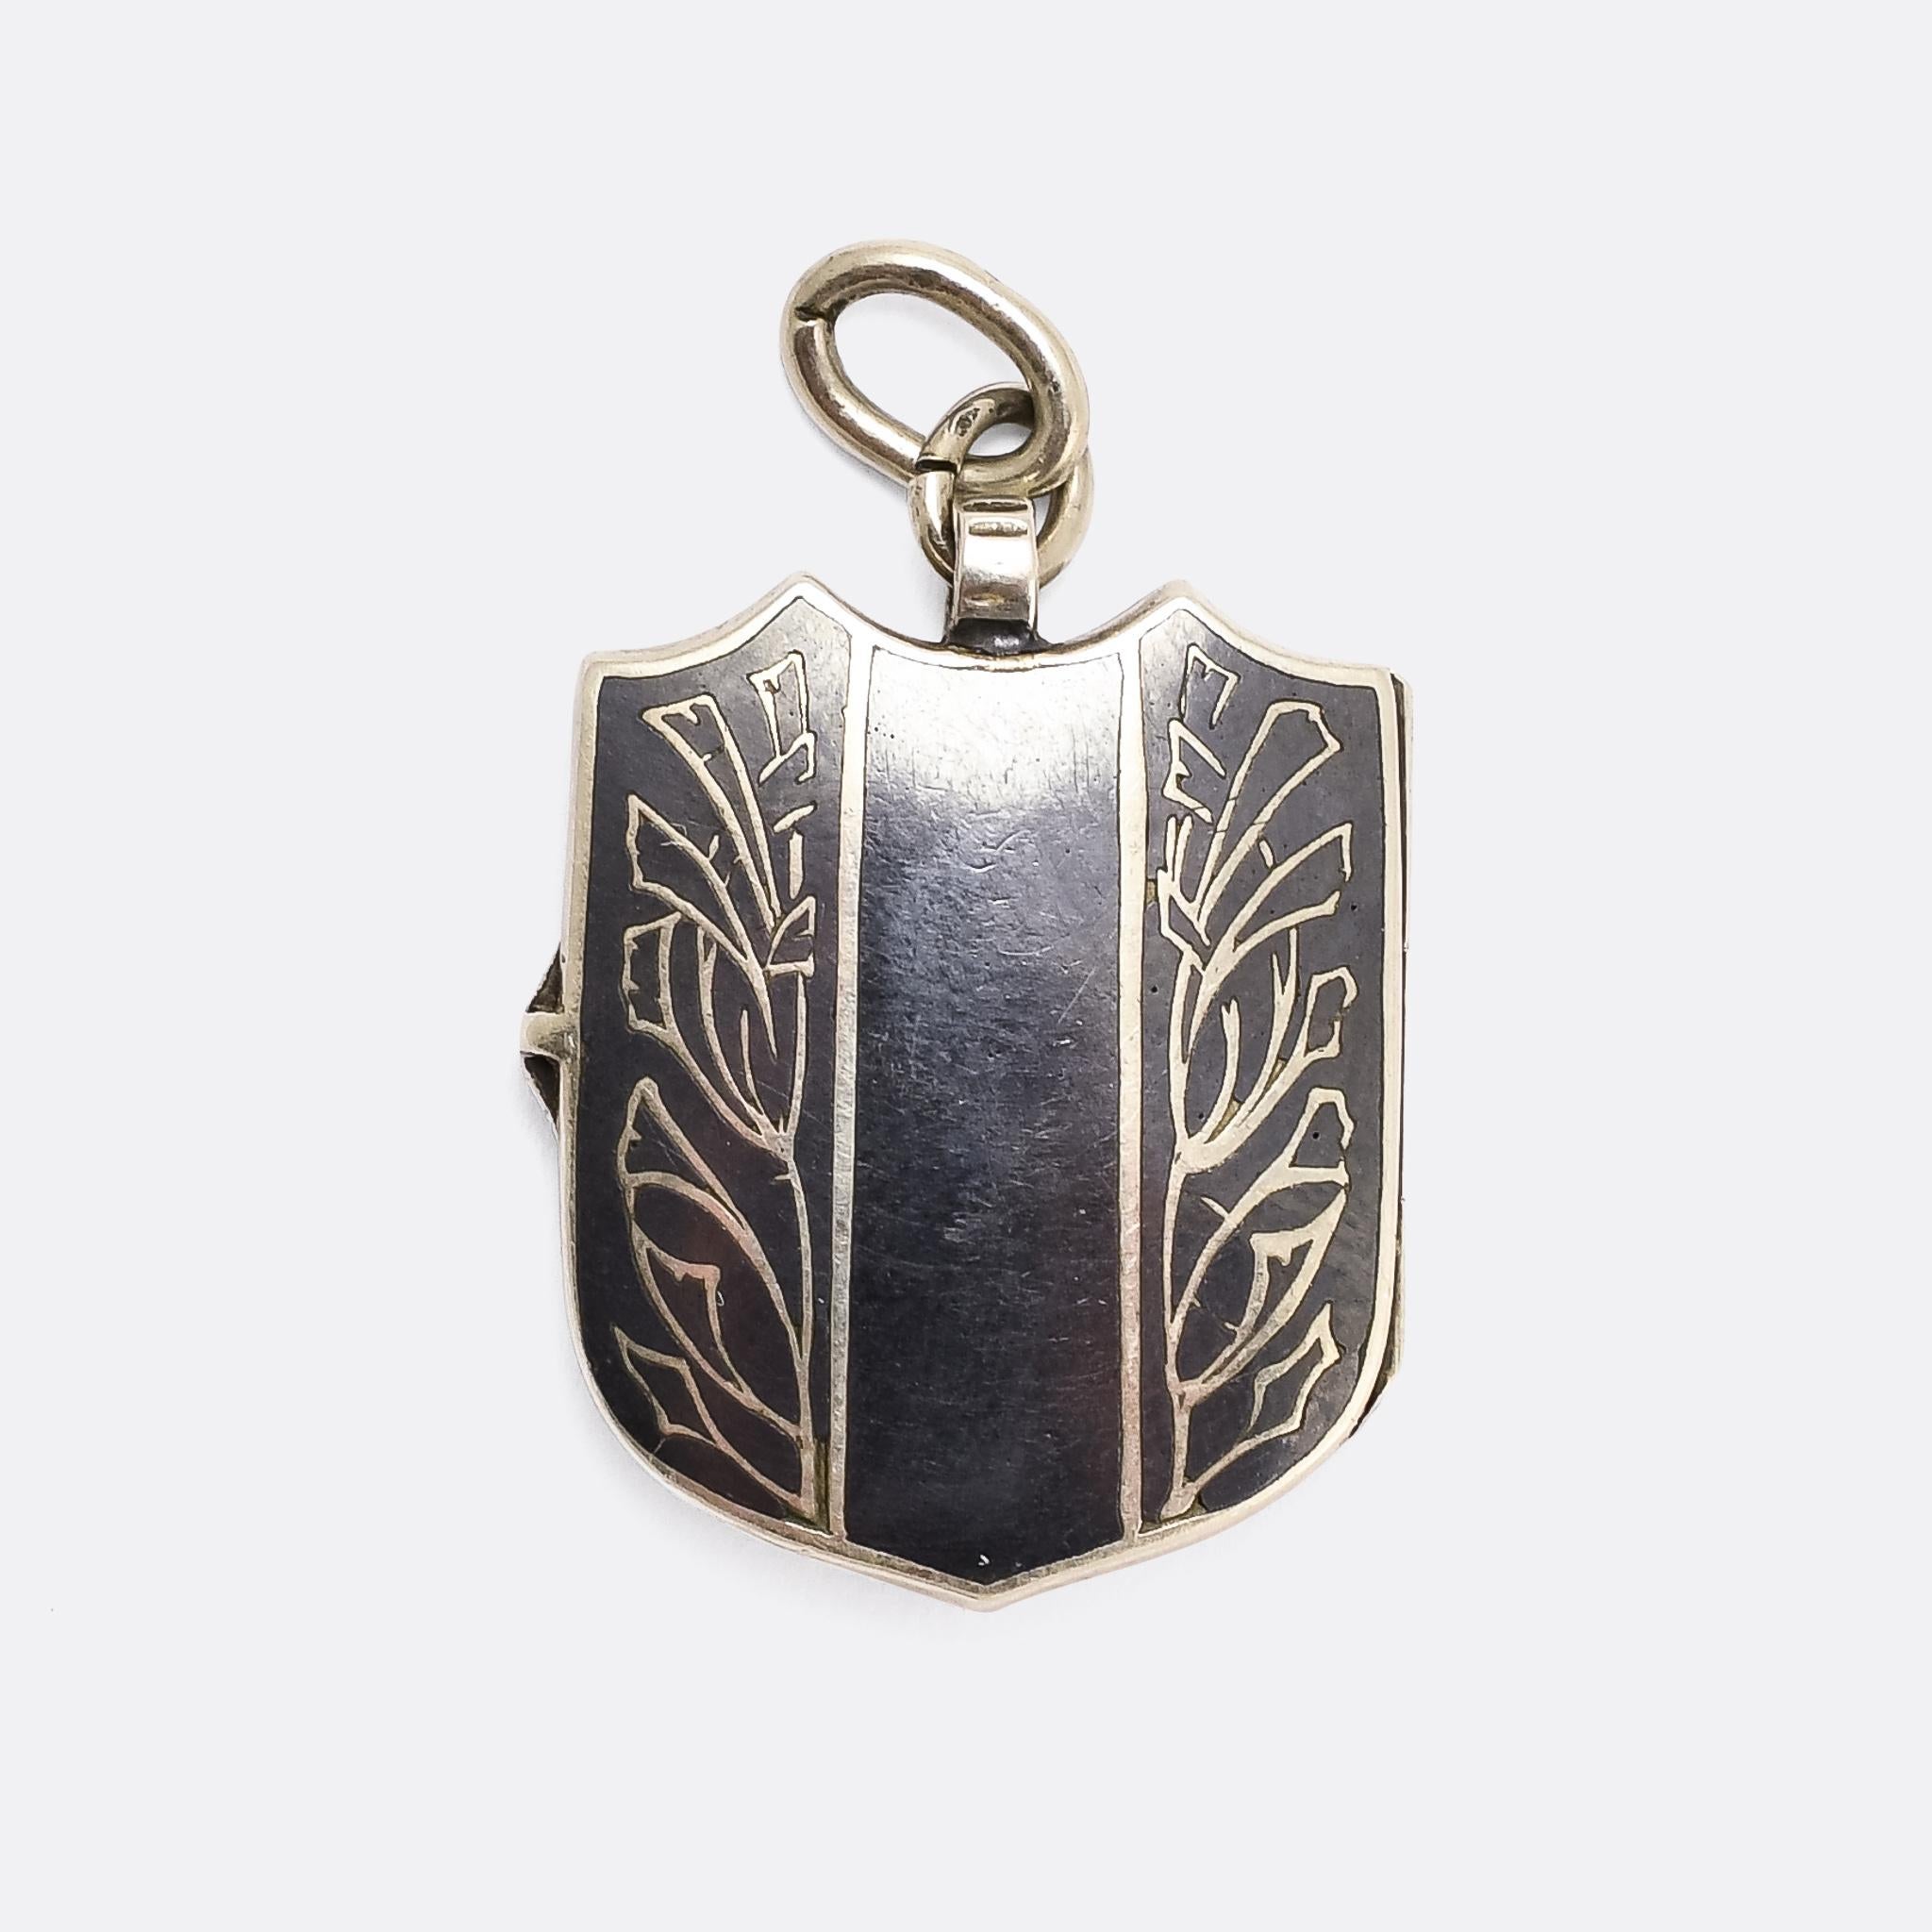 An attractive antique shield locket fashioned in niello silver. It's Russian, dating from the turn of the 20th century, with three gold stars down the middle and stylized thistles (?) on either side. It opens to reveal two oval shaped compartments